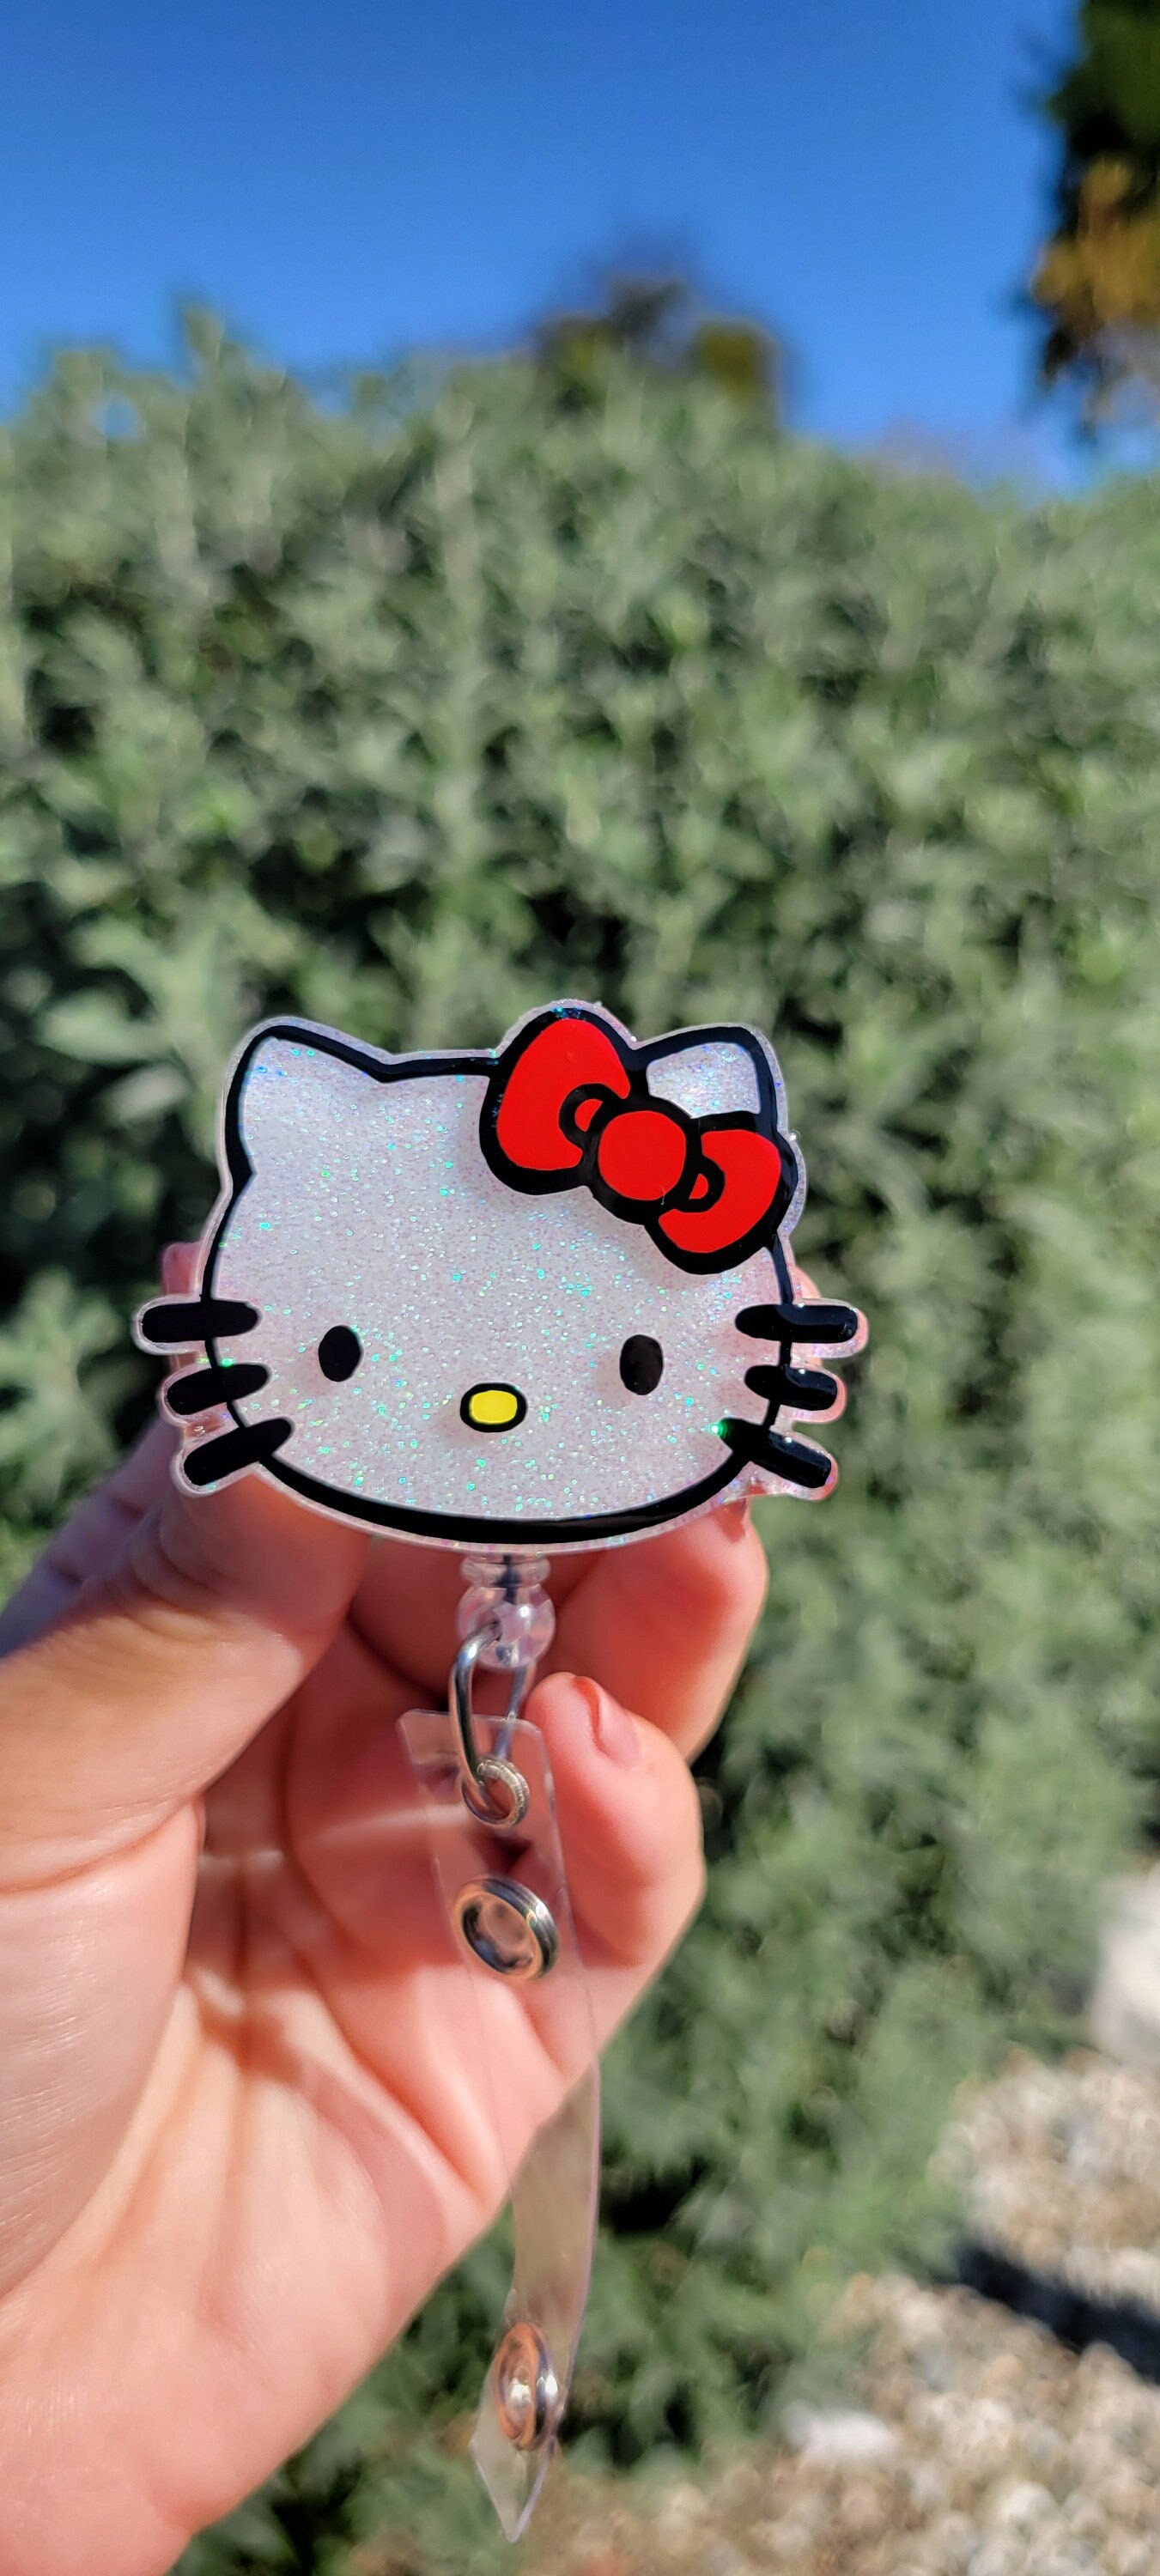 Kitty Badge Reel Inspired, Kitty Face Badge Reel, Retractable